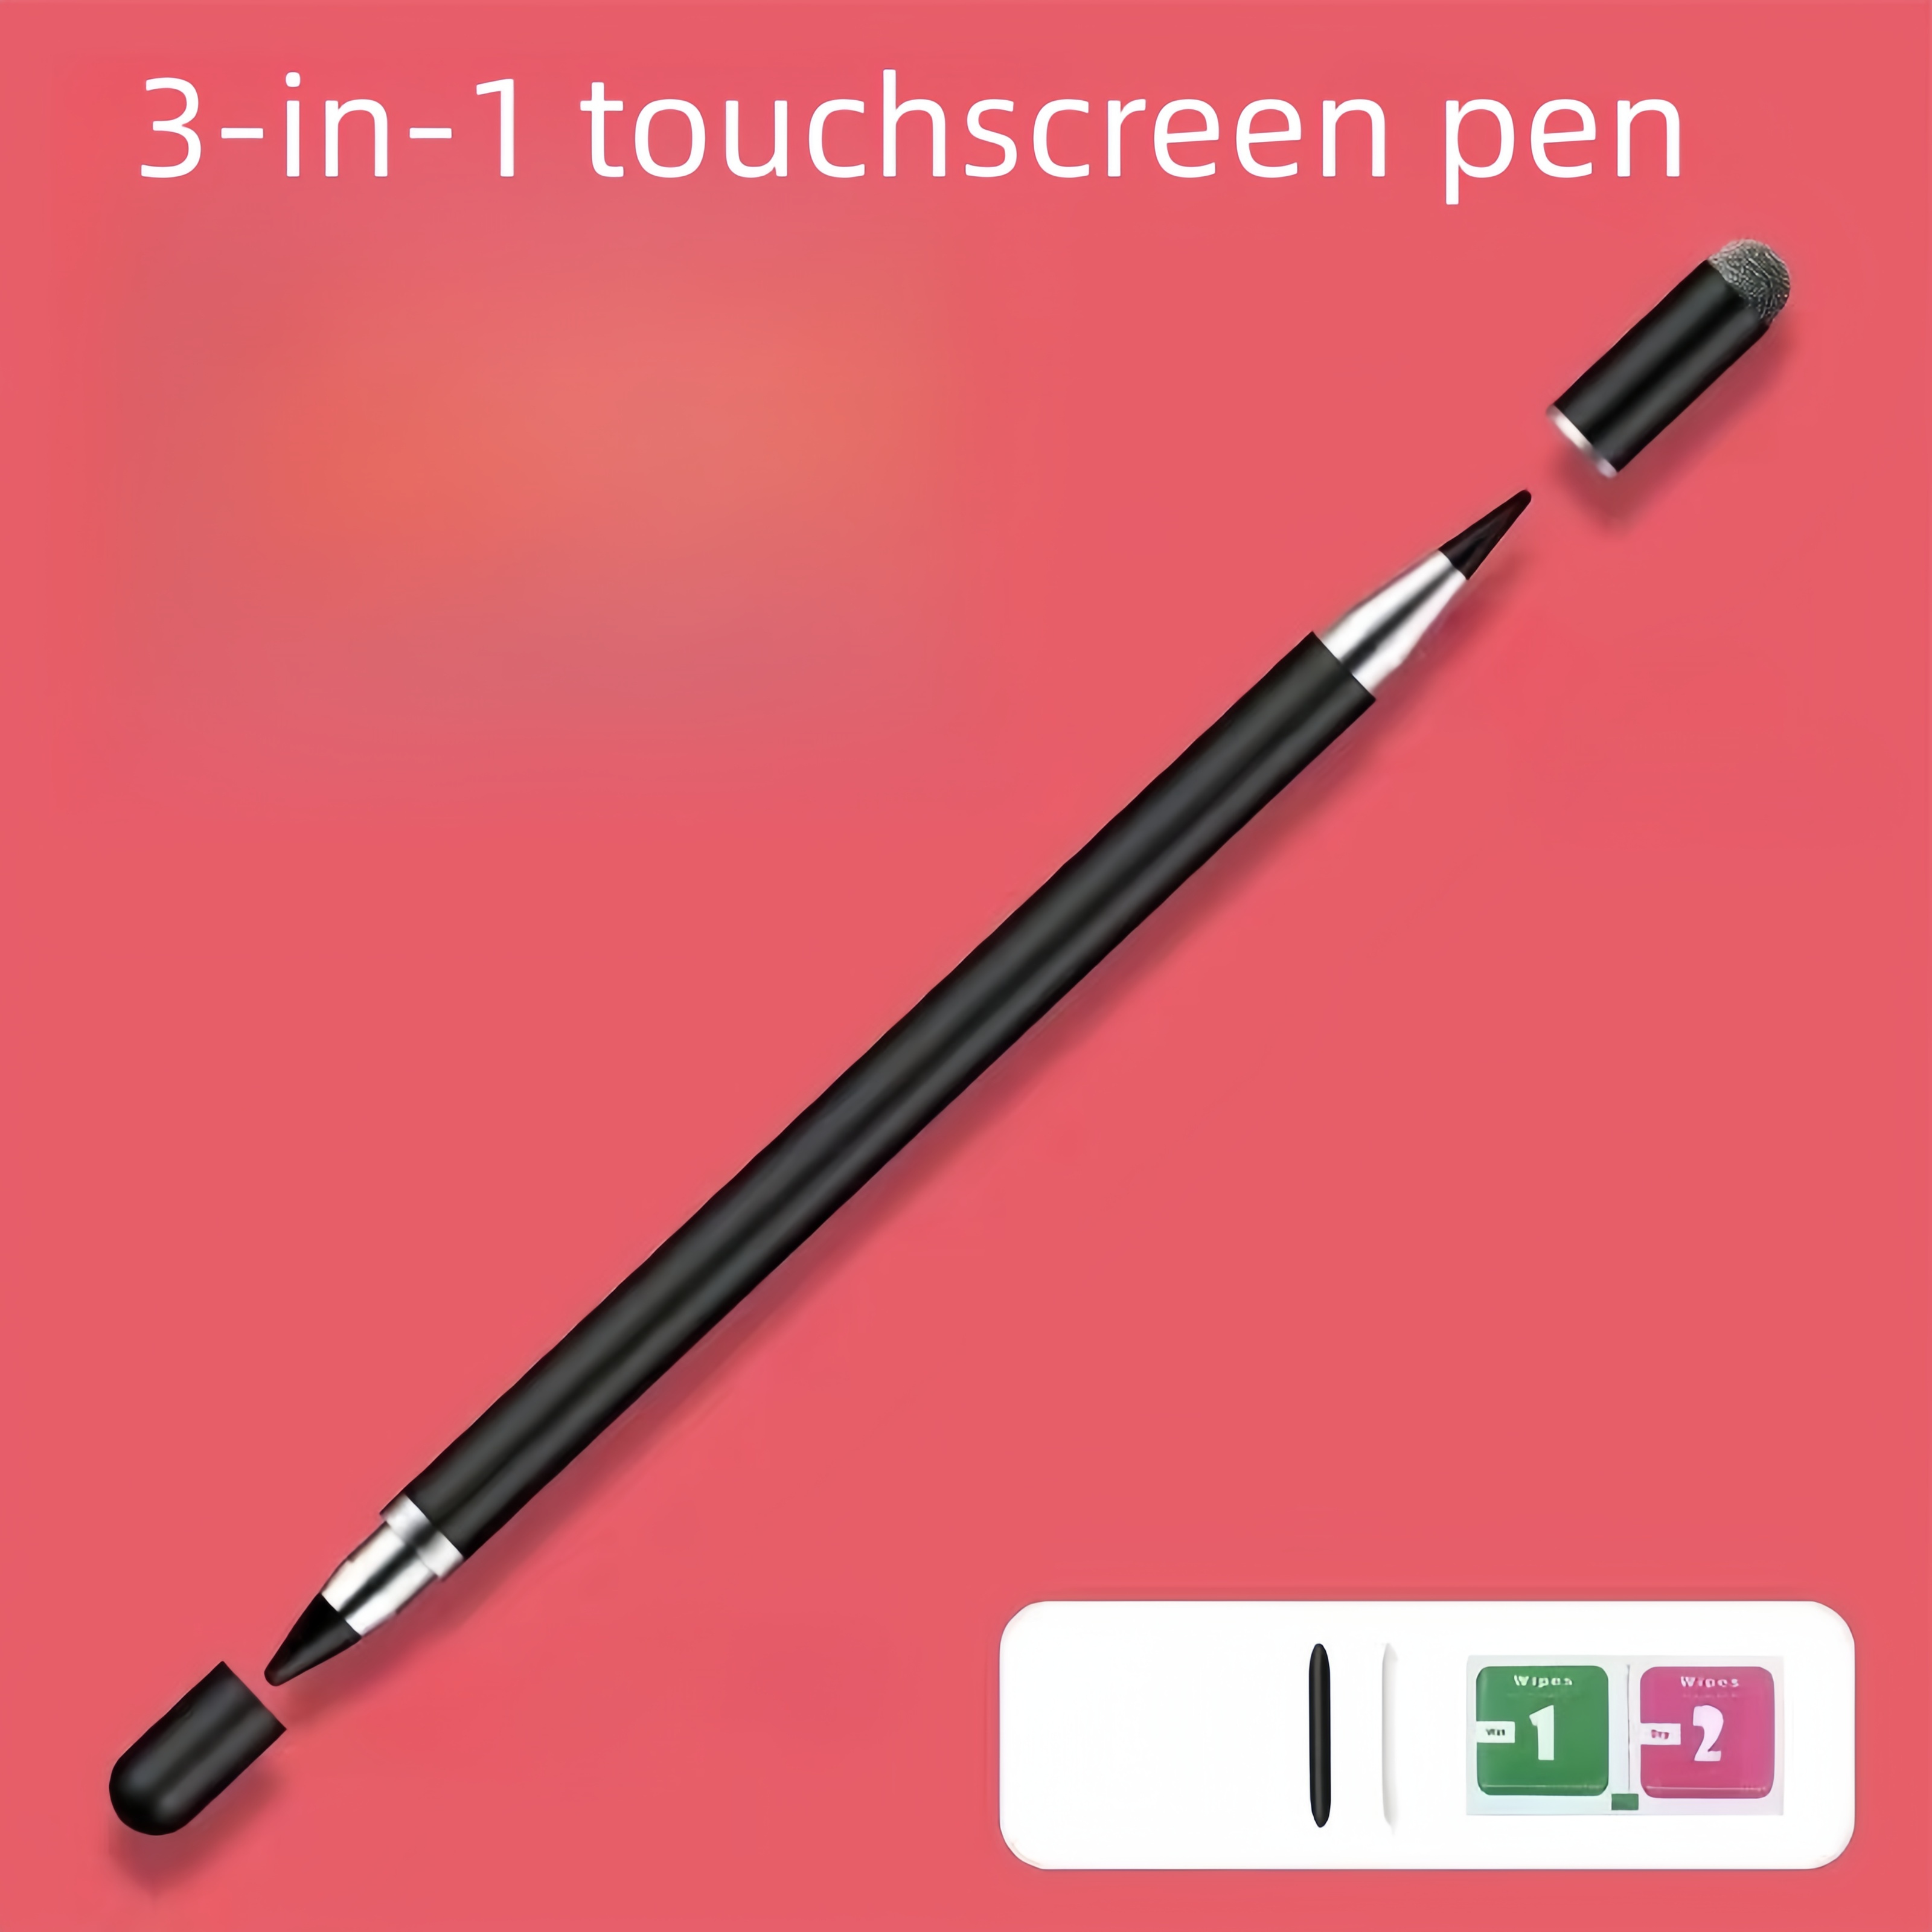 Stylus Pens for Touch Screens, 3 Pack Disc Universal Stylus Pen for iPad  pro/Mini/Air/iPhone/Android/Microsoft Tablets and All Capacitive Touch